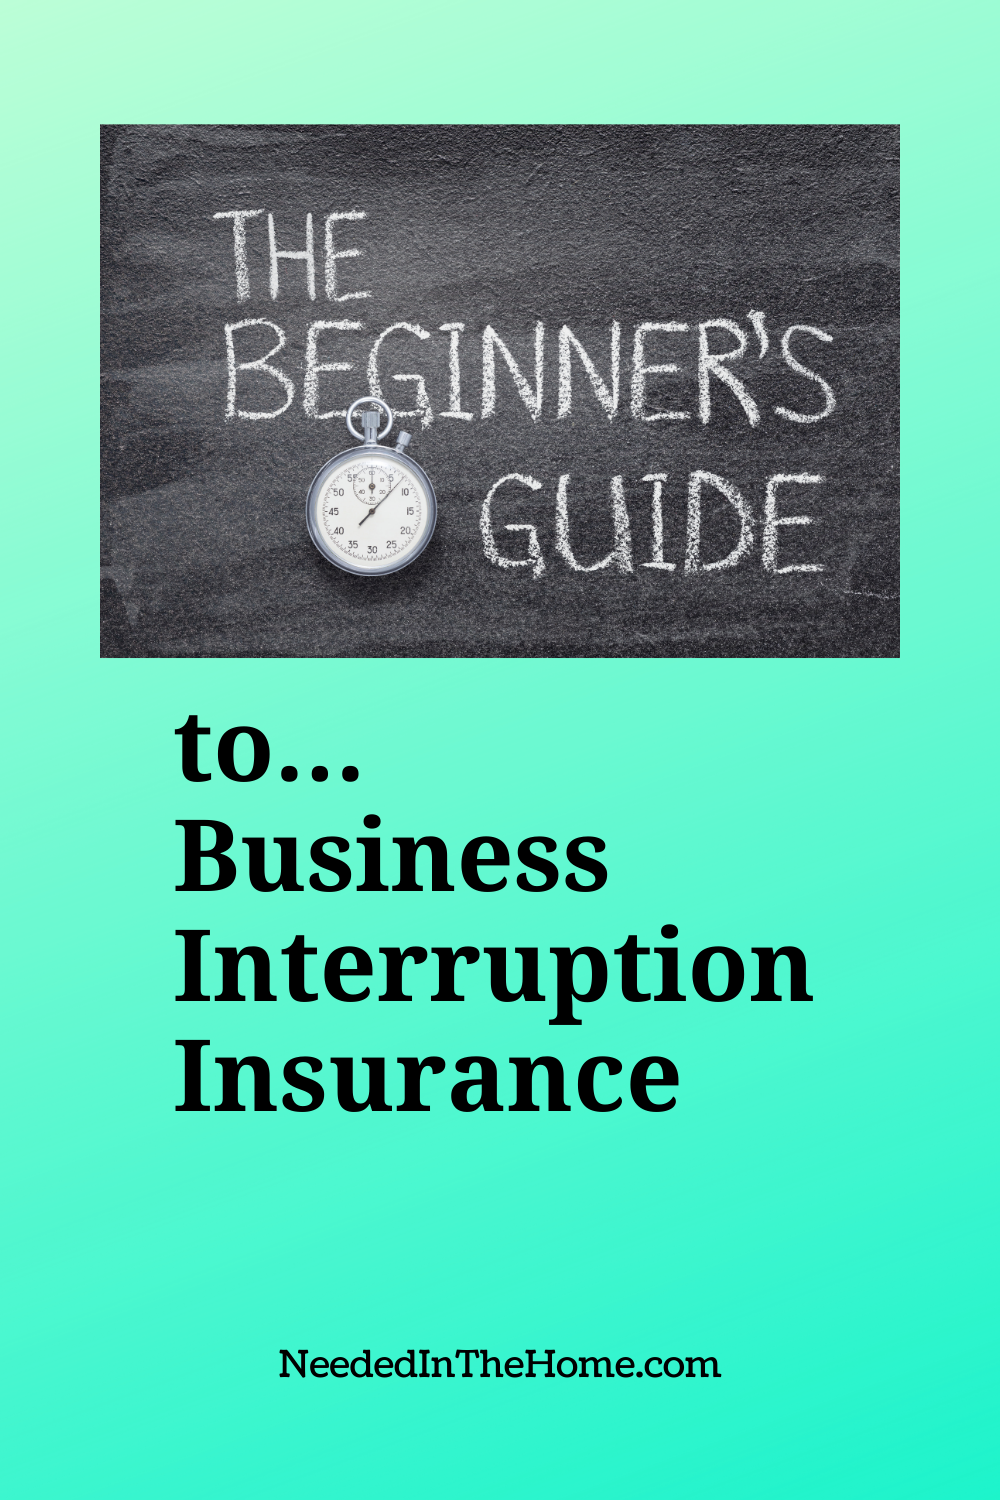 pinterest-pin-description the beginner's guide to business interruption insurance chalkboard writing with stopwatch neededinthehome